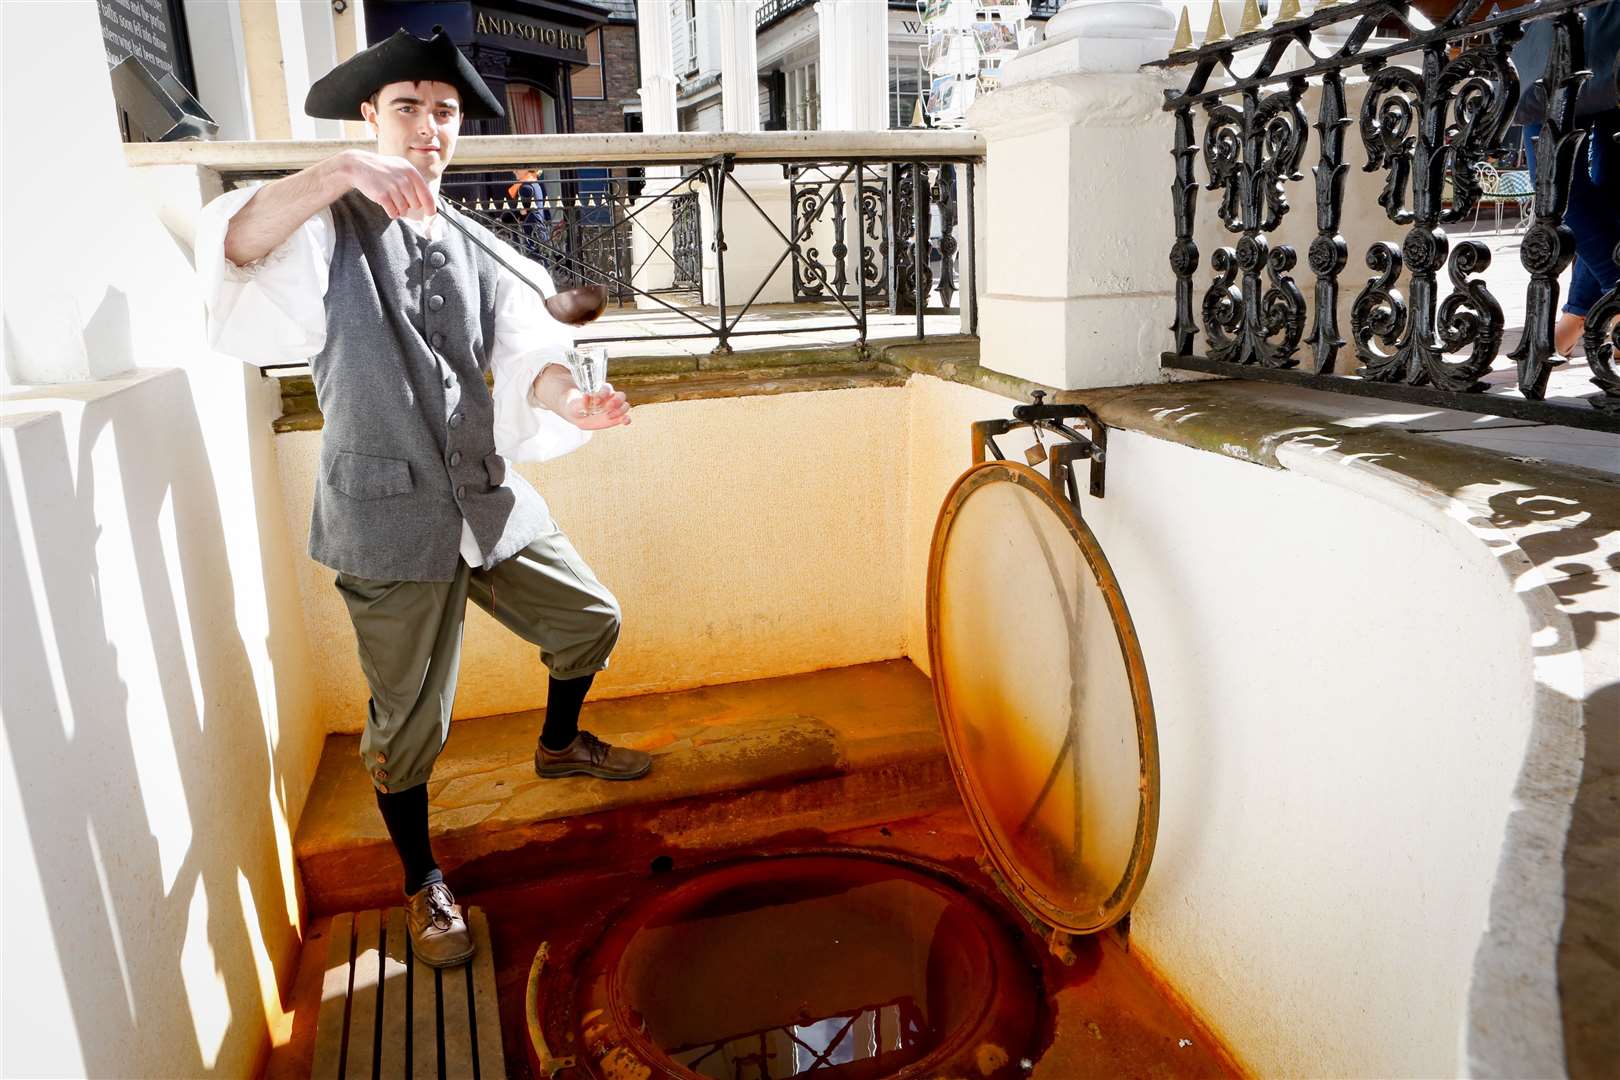 Larry dips for water at the Chalybeate Spring on The Pantiles. Picture: Matthew Walker